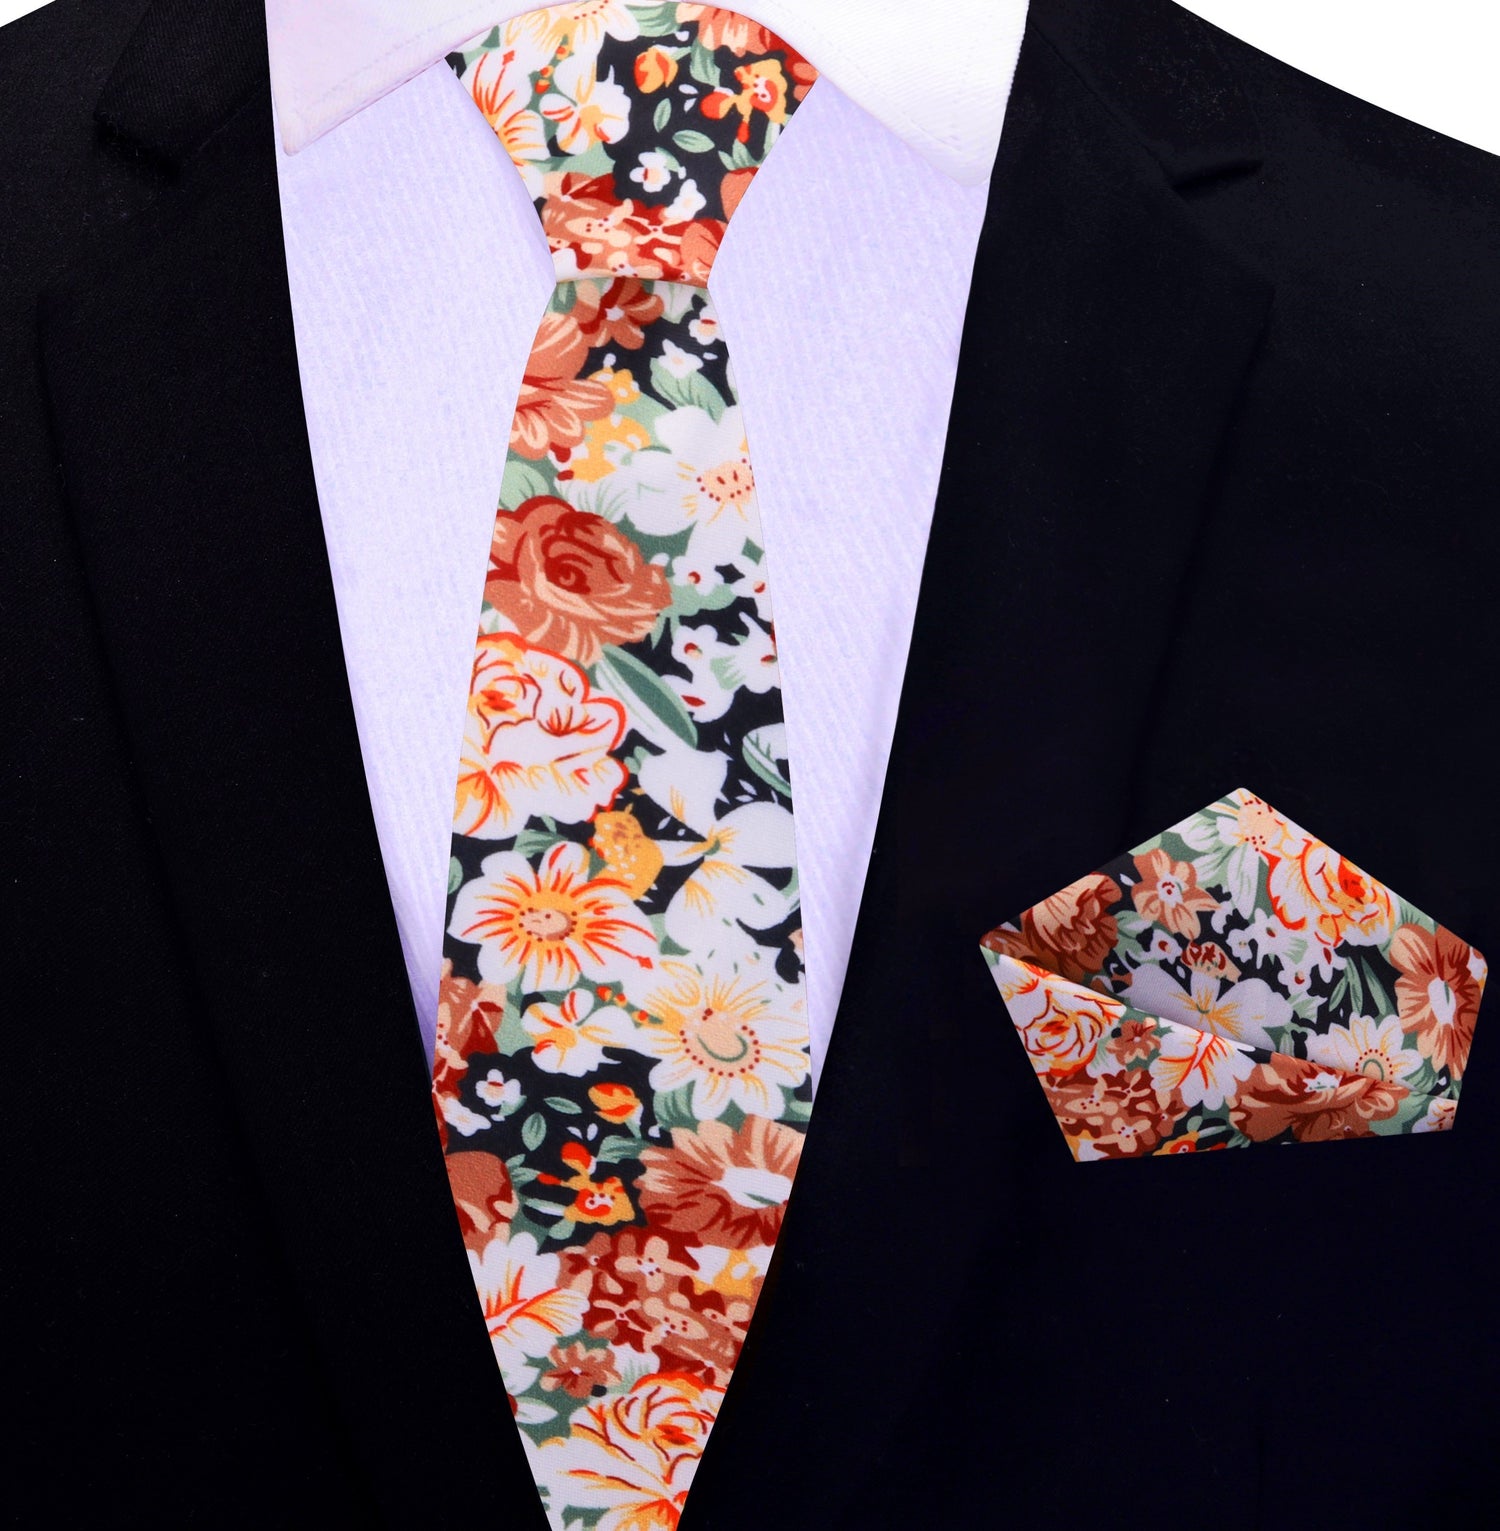 Thin Tie: Brown, Orange, White, Green Sketched Flowers Tie and Matching Square